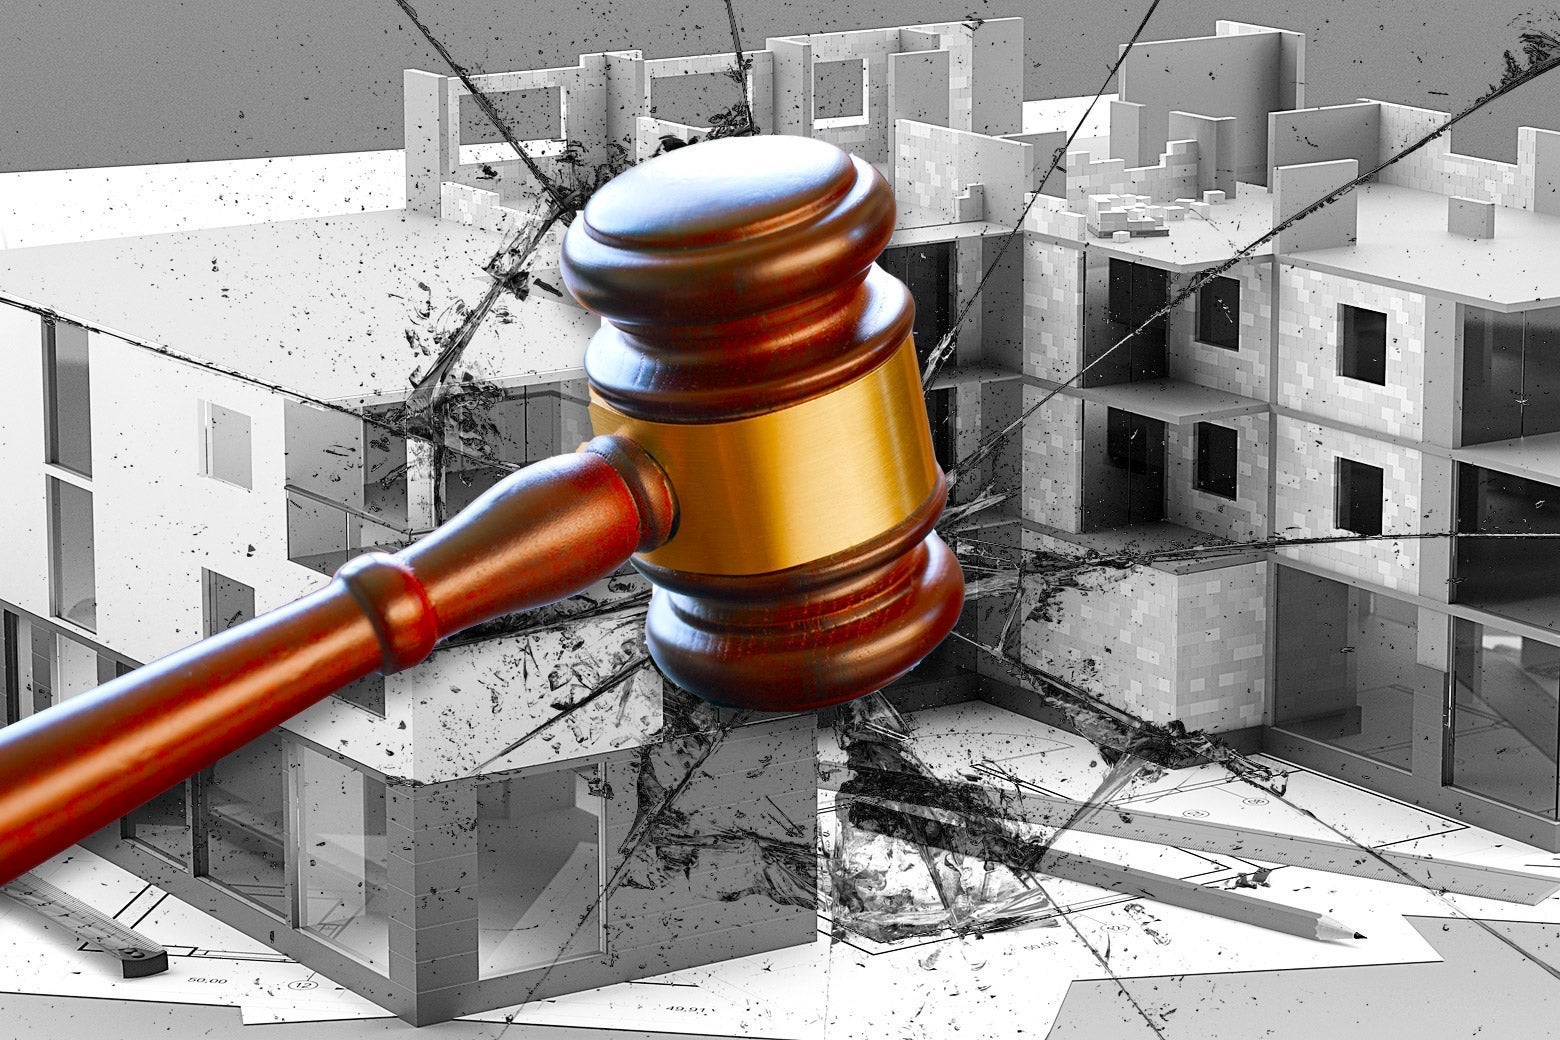 An illustration of a gavel smashing an image of a building under construction.